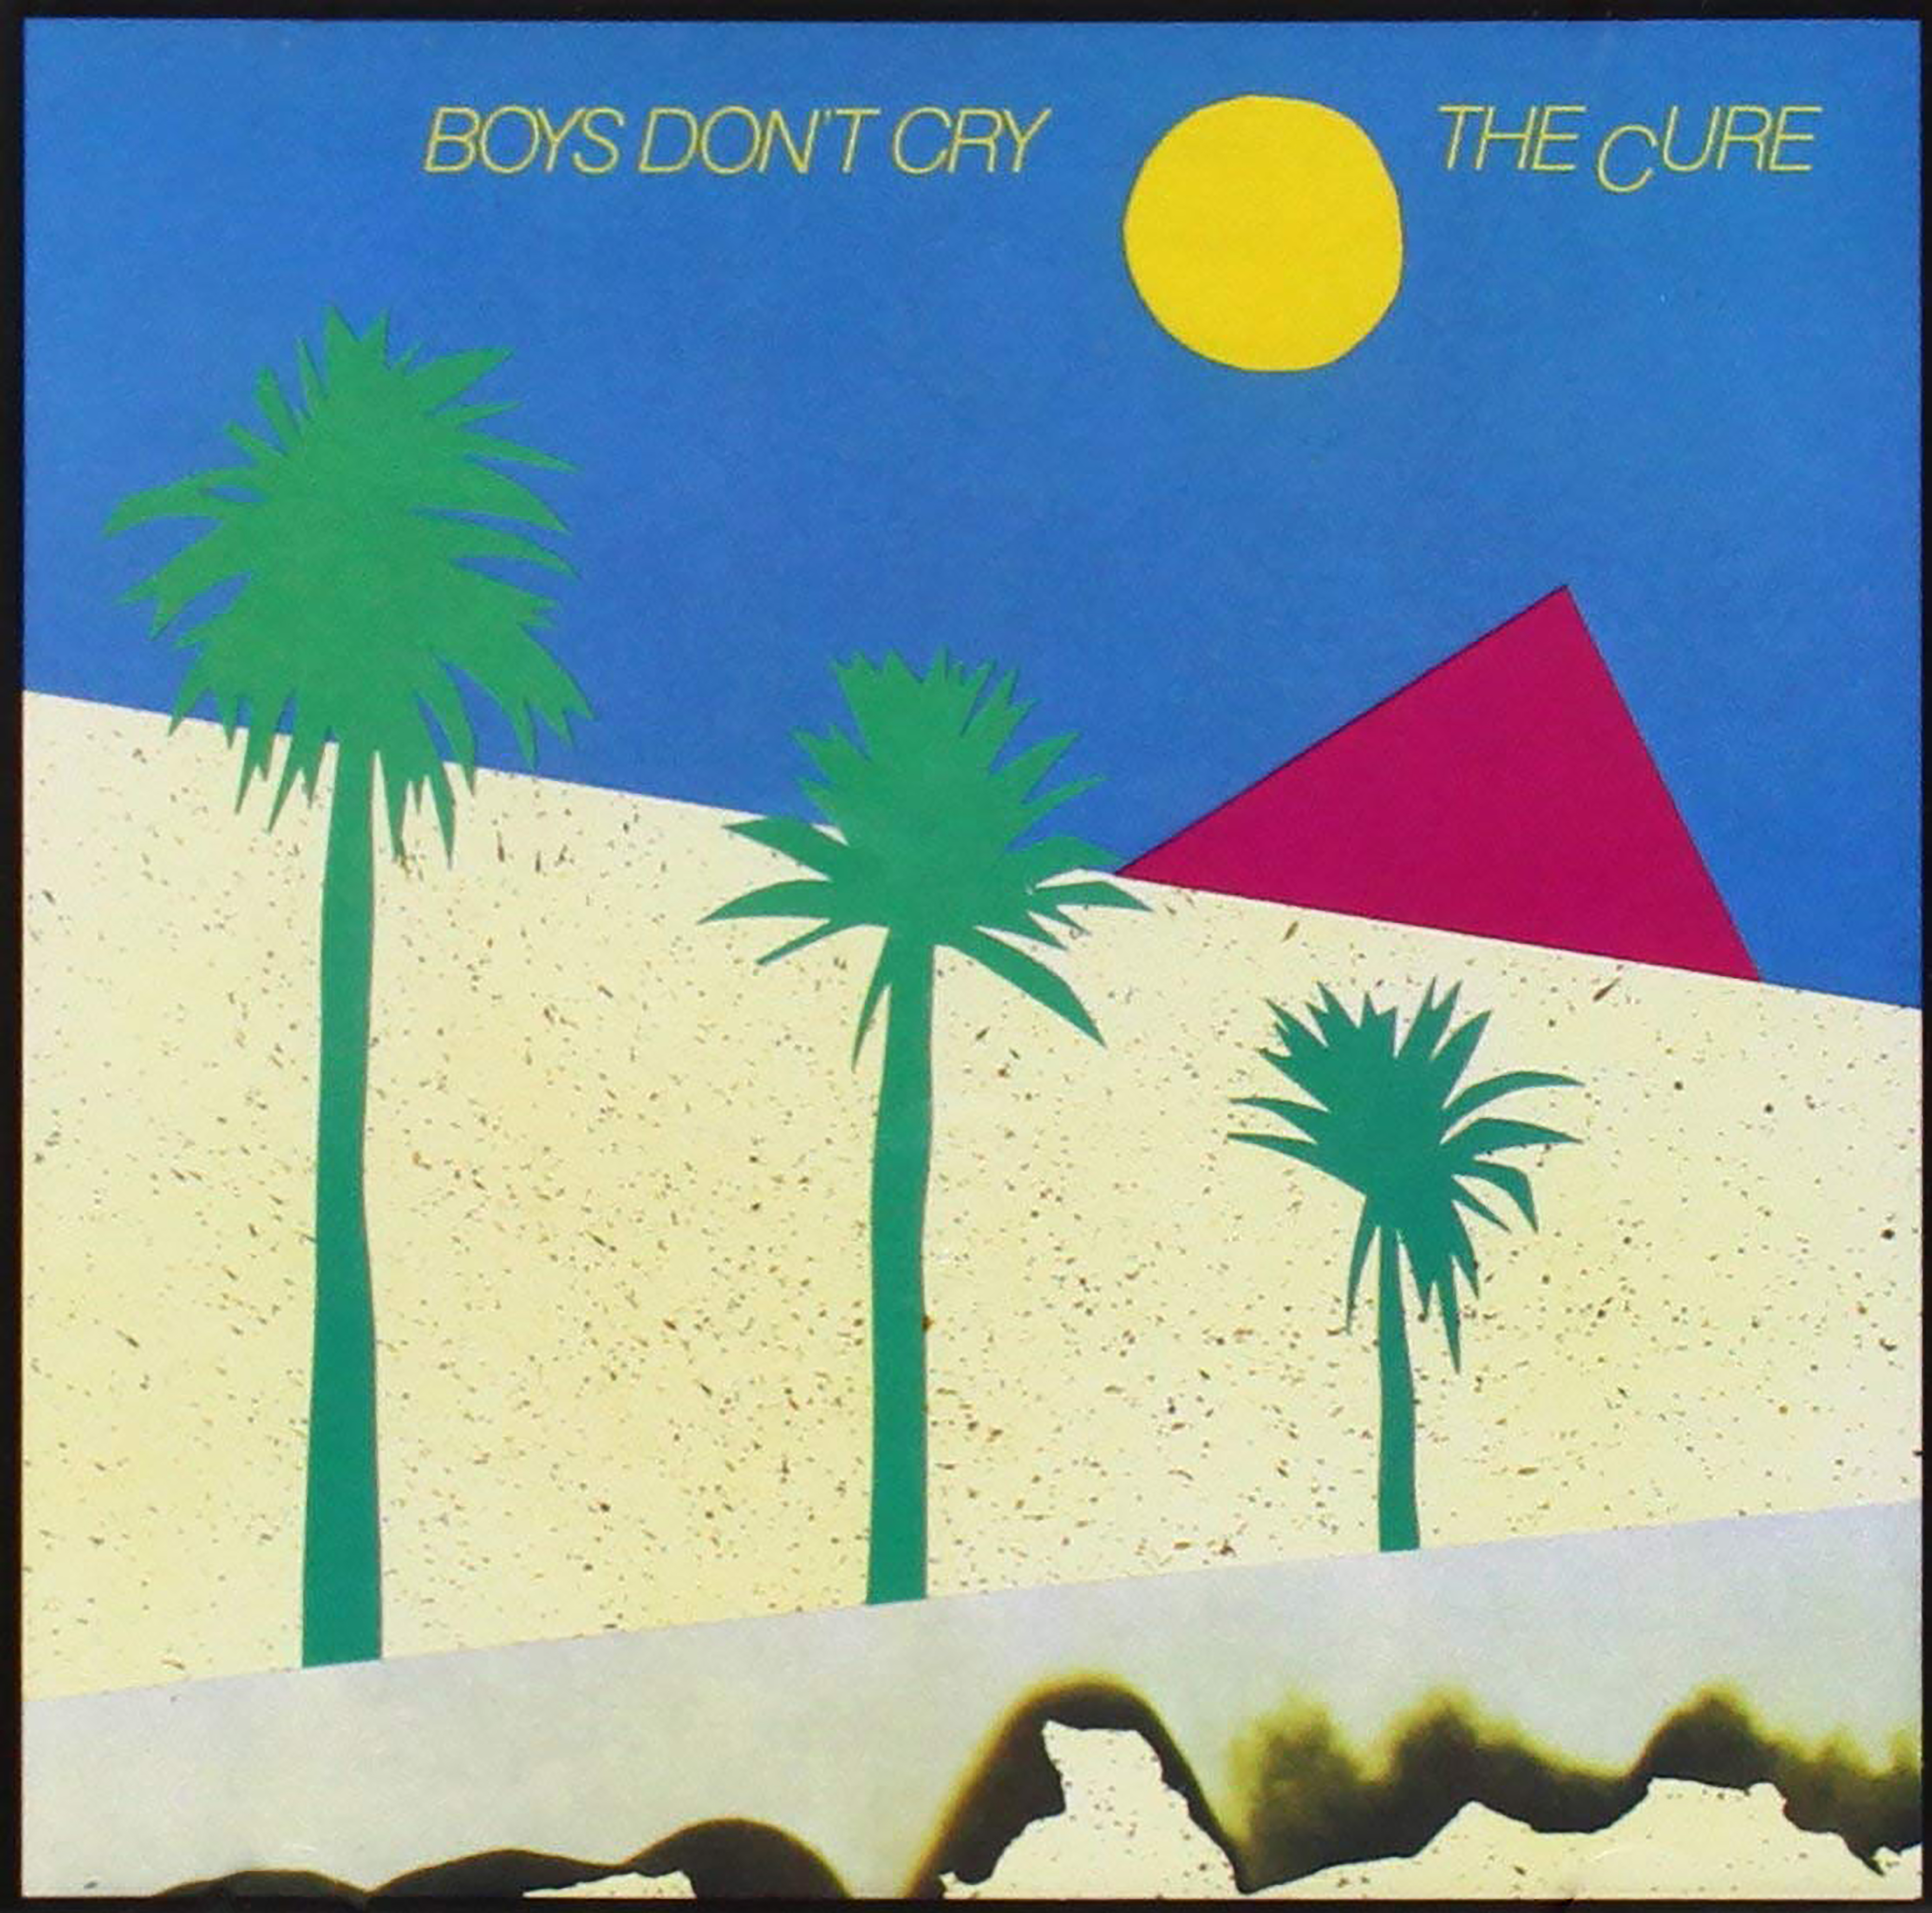 「Boys Don't Cry」収録アルバム『Boys Don't Cry』／The Cure